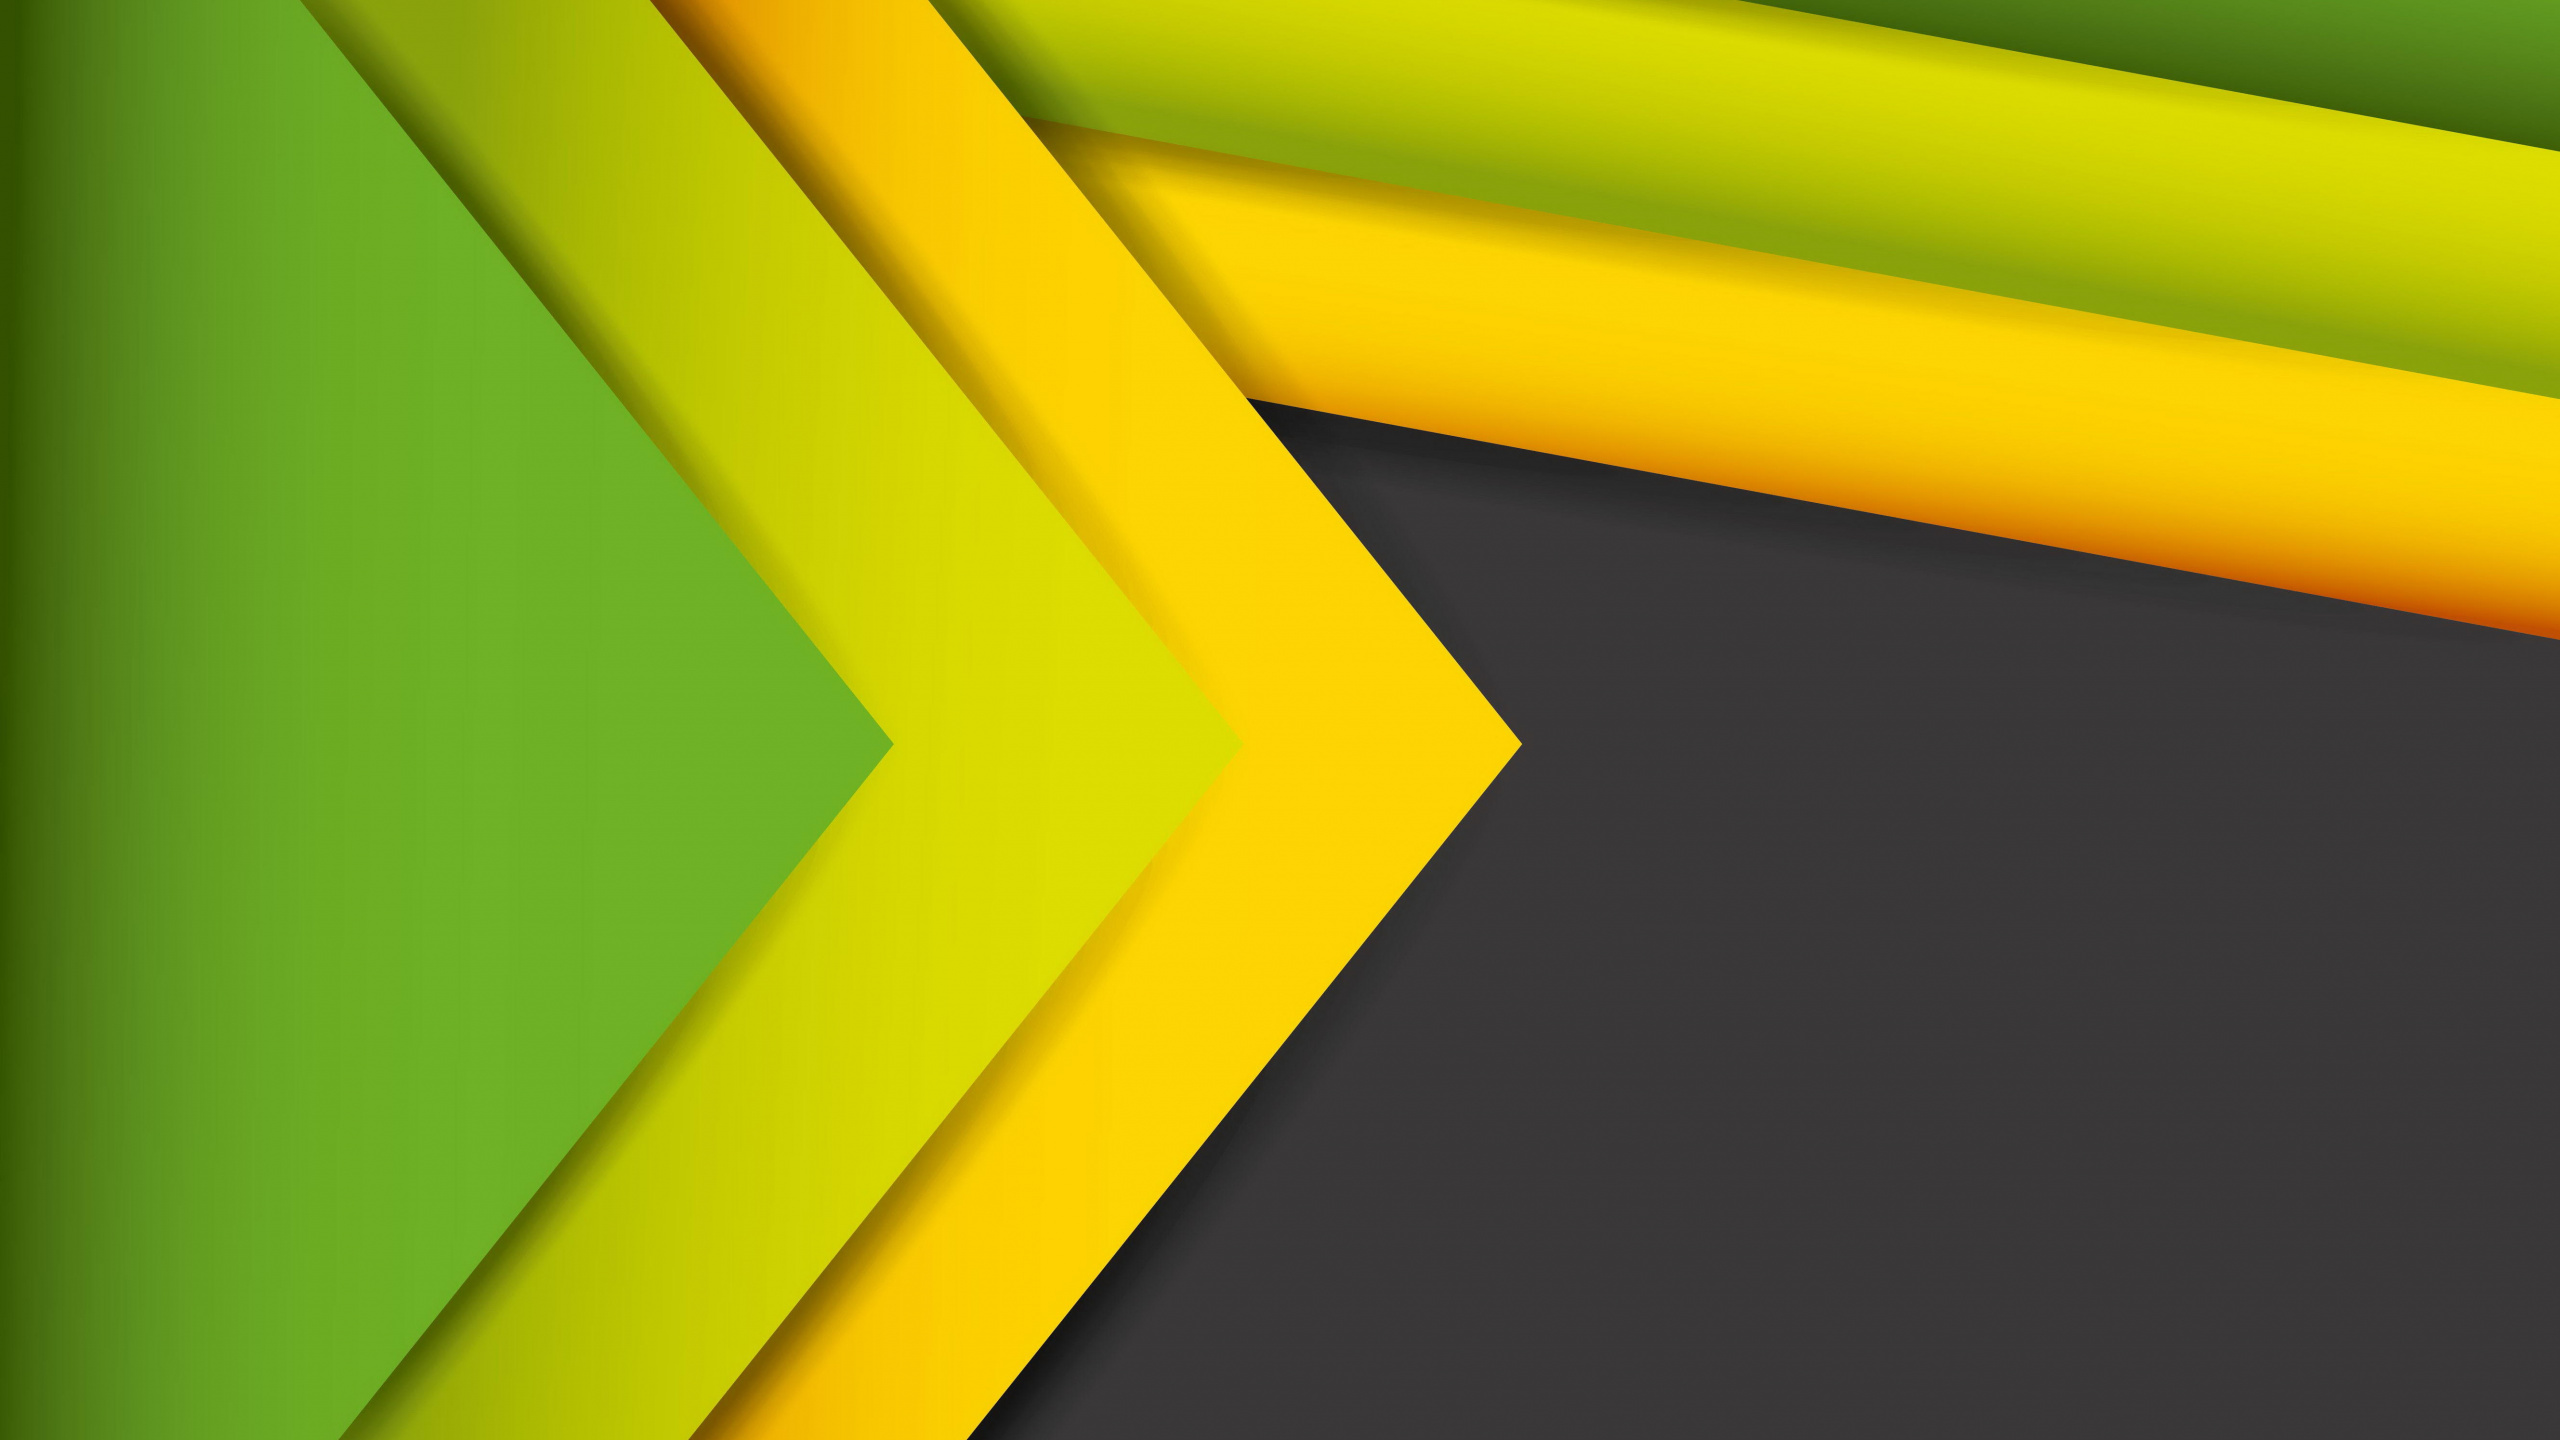 Yellow and Green Triangle Illustration. Wallpaper in 2560x1440 Resolution